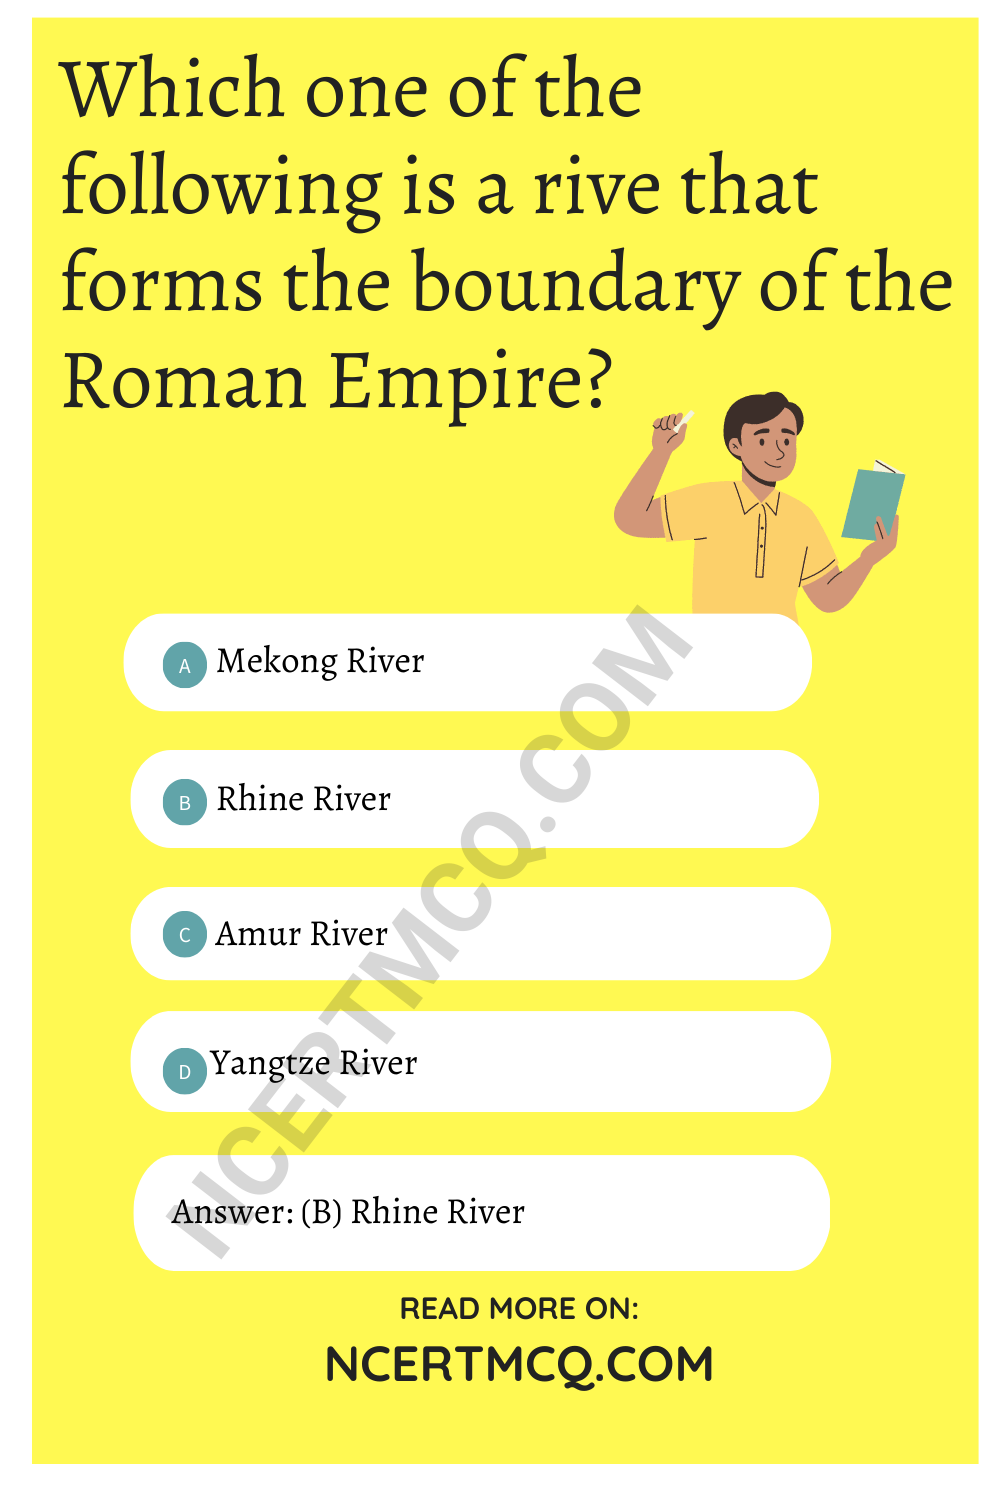 Which one of the following is a rive that forms the boundary of the Roman Empire?